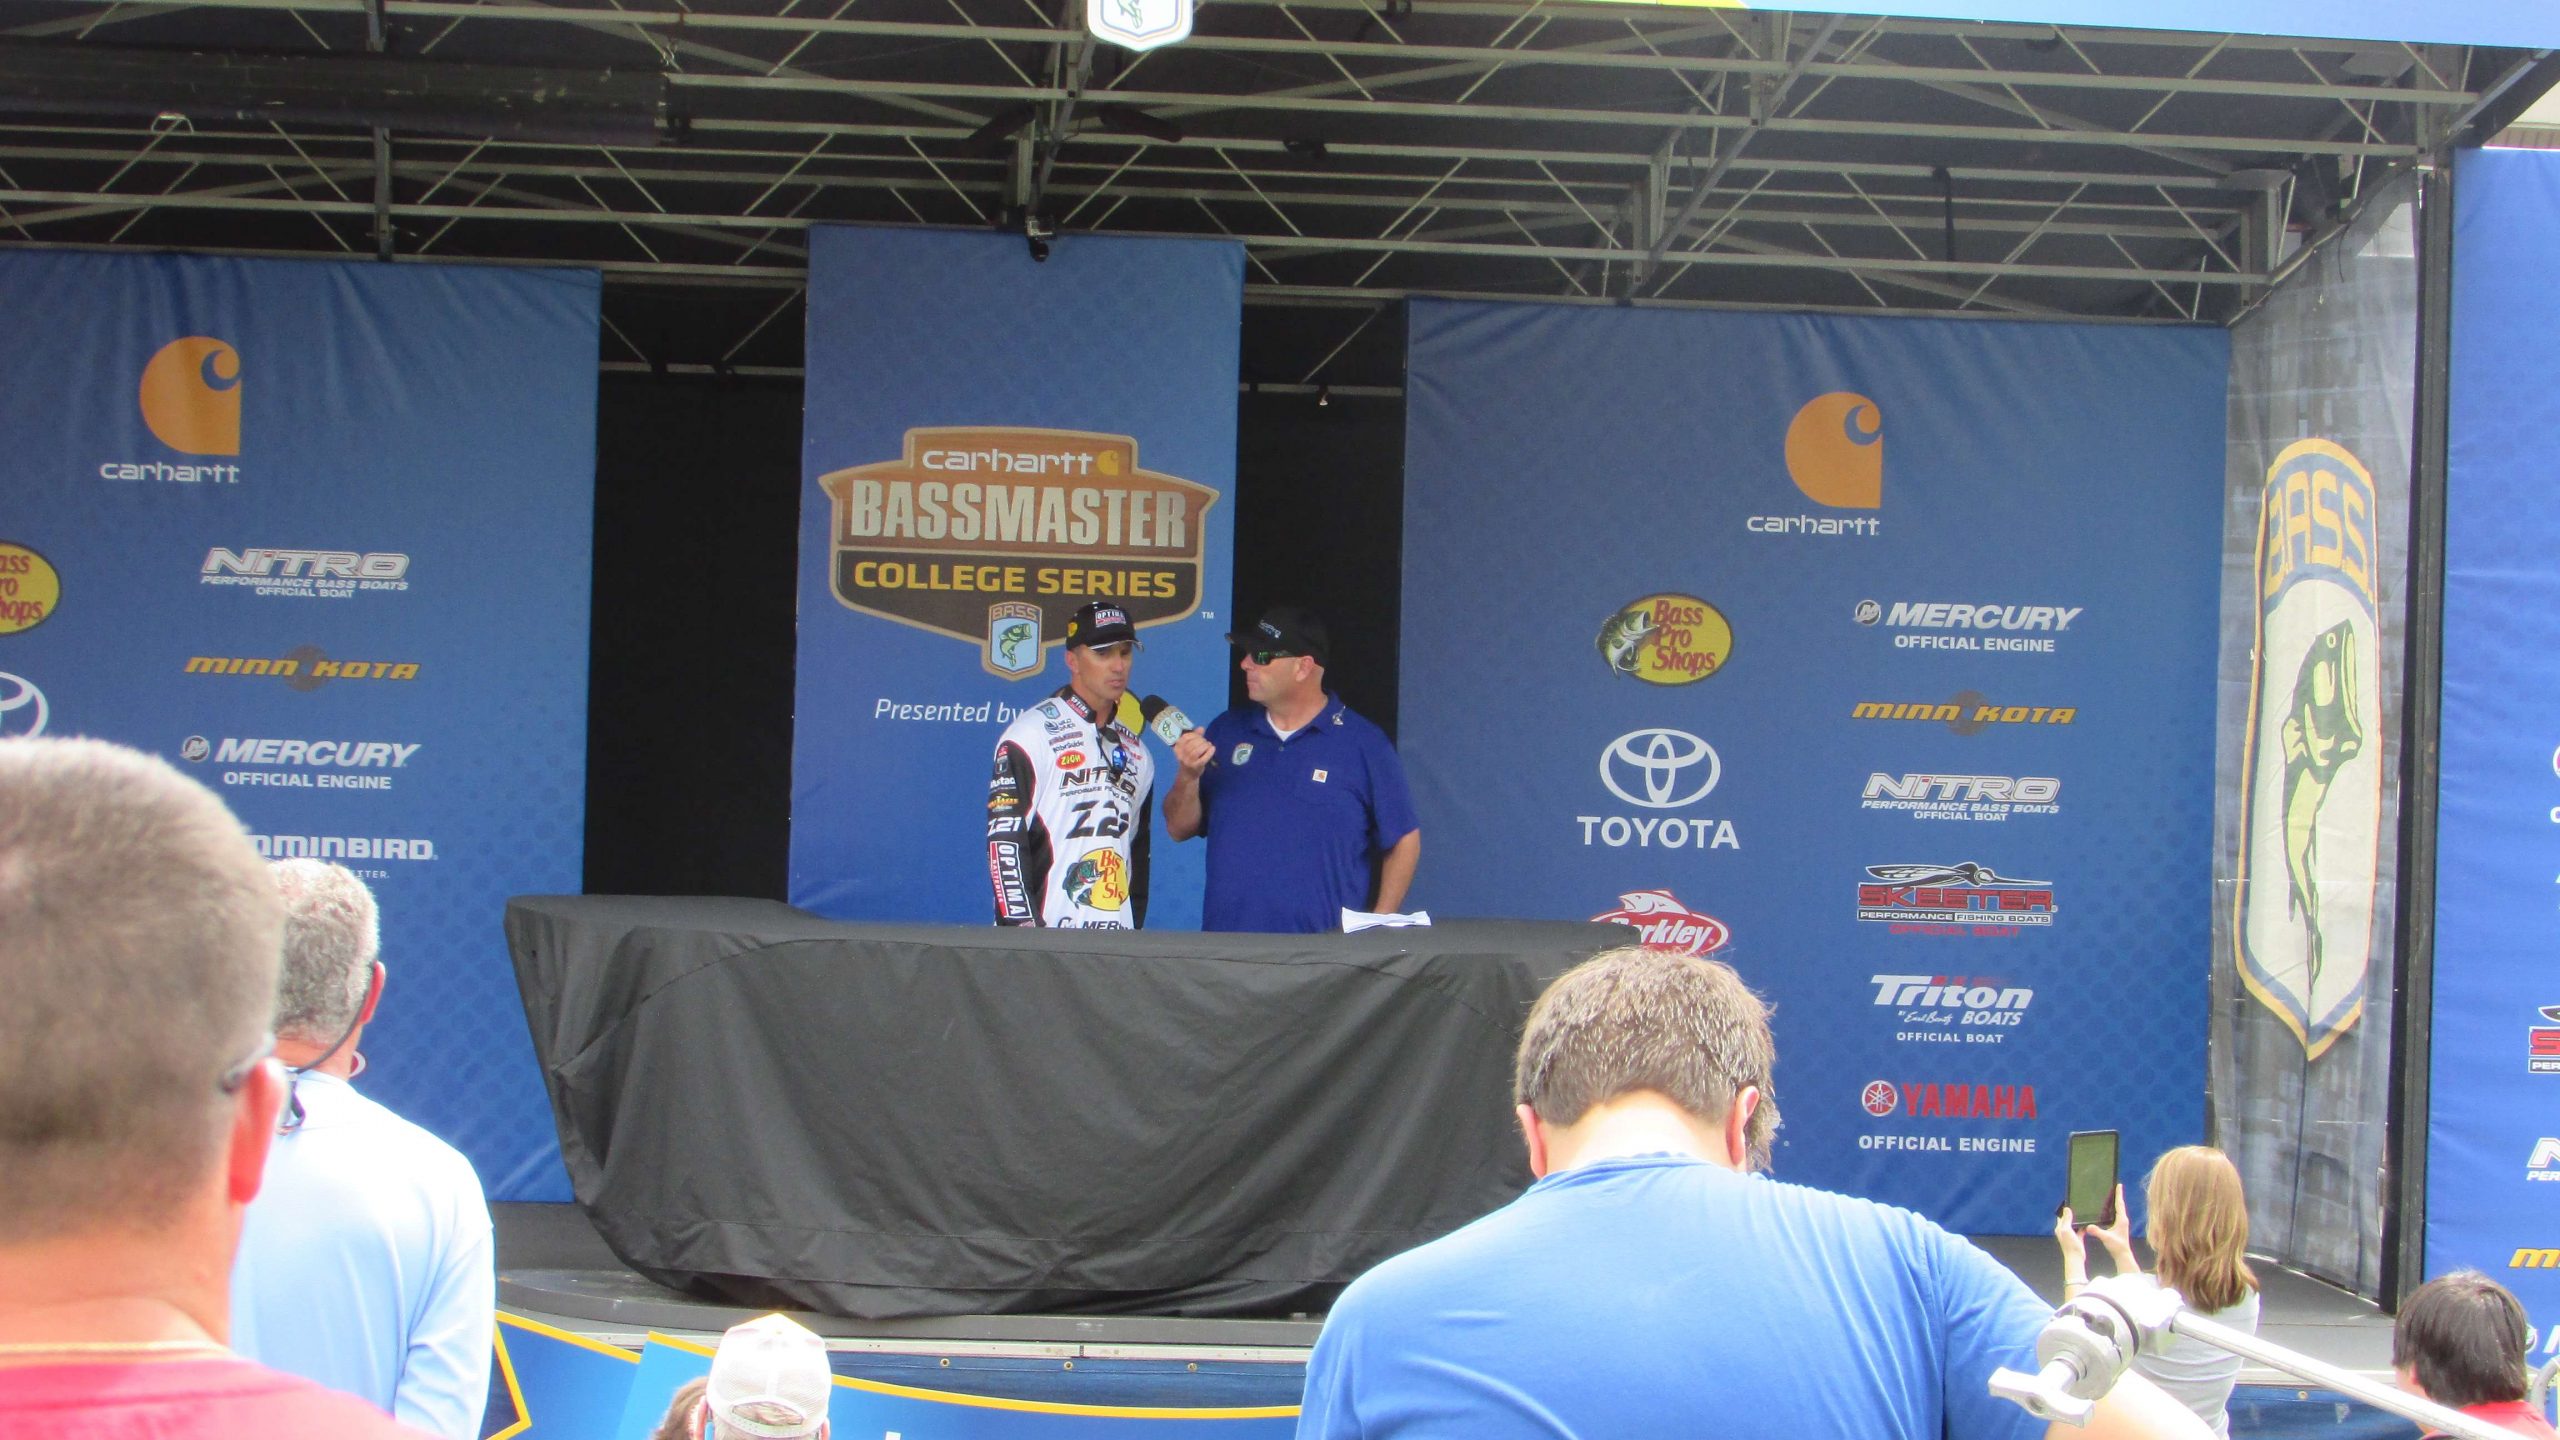 Mercer made remote appearances on Bassmaster LIVE and kicked off the day's events at Paris Landing.